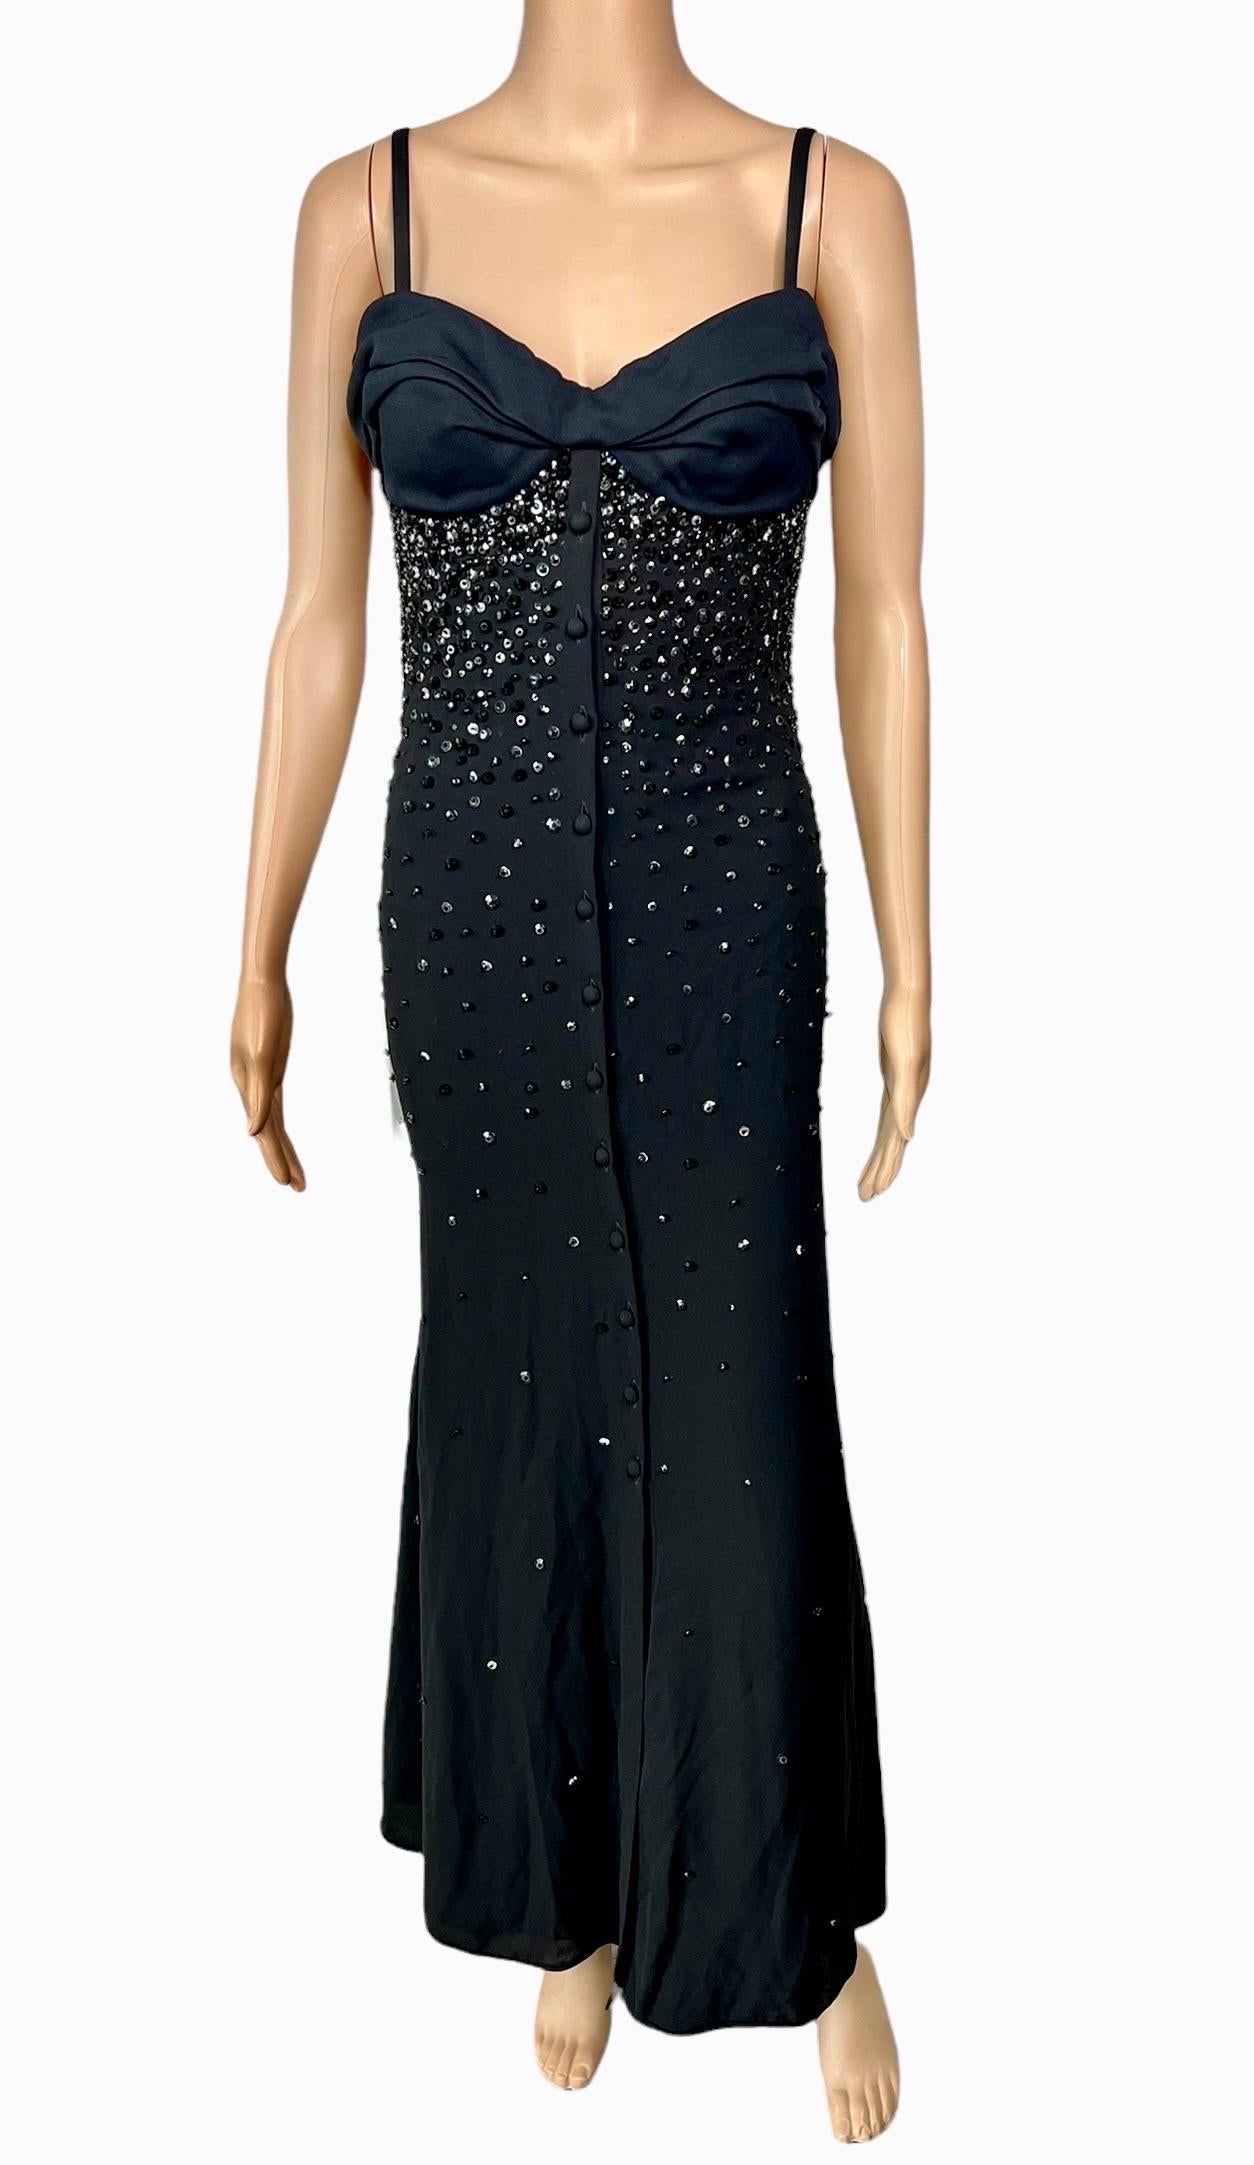 Women's Gianni Versace S/S 1996 Runway Embellished Bustier Black Evening Dress Gown  For Sale